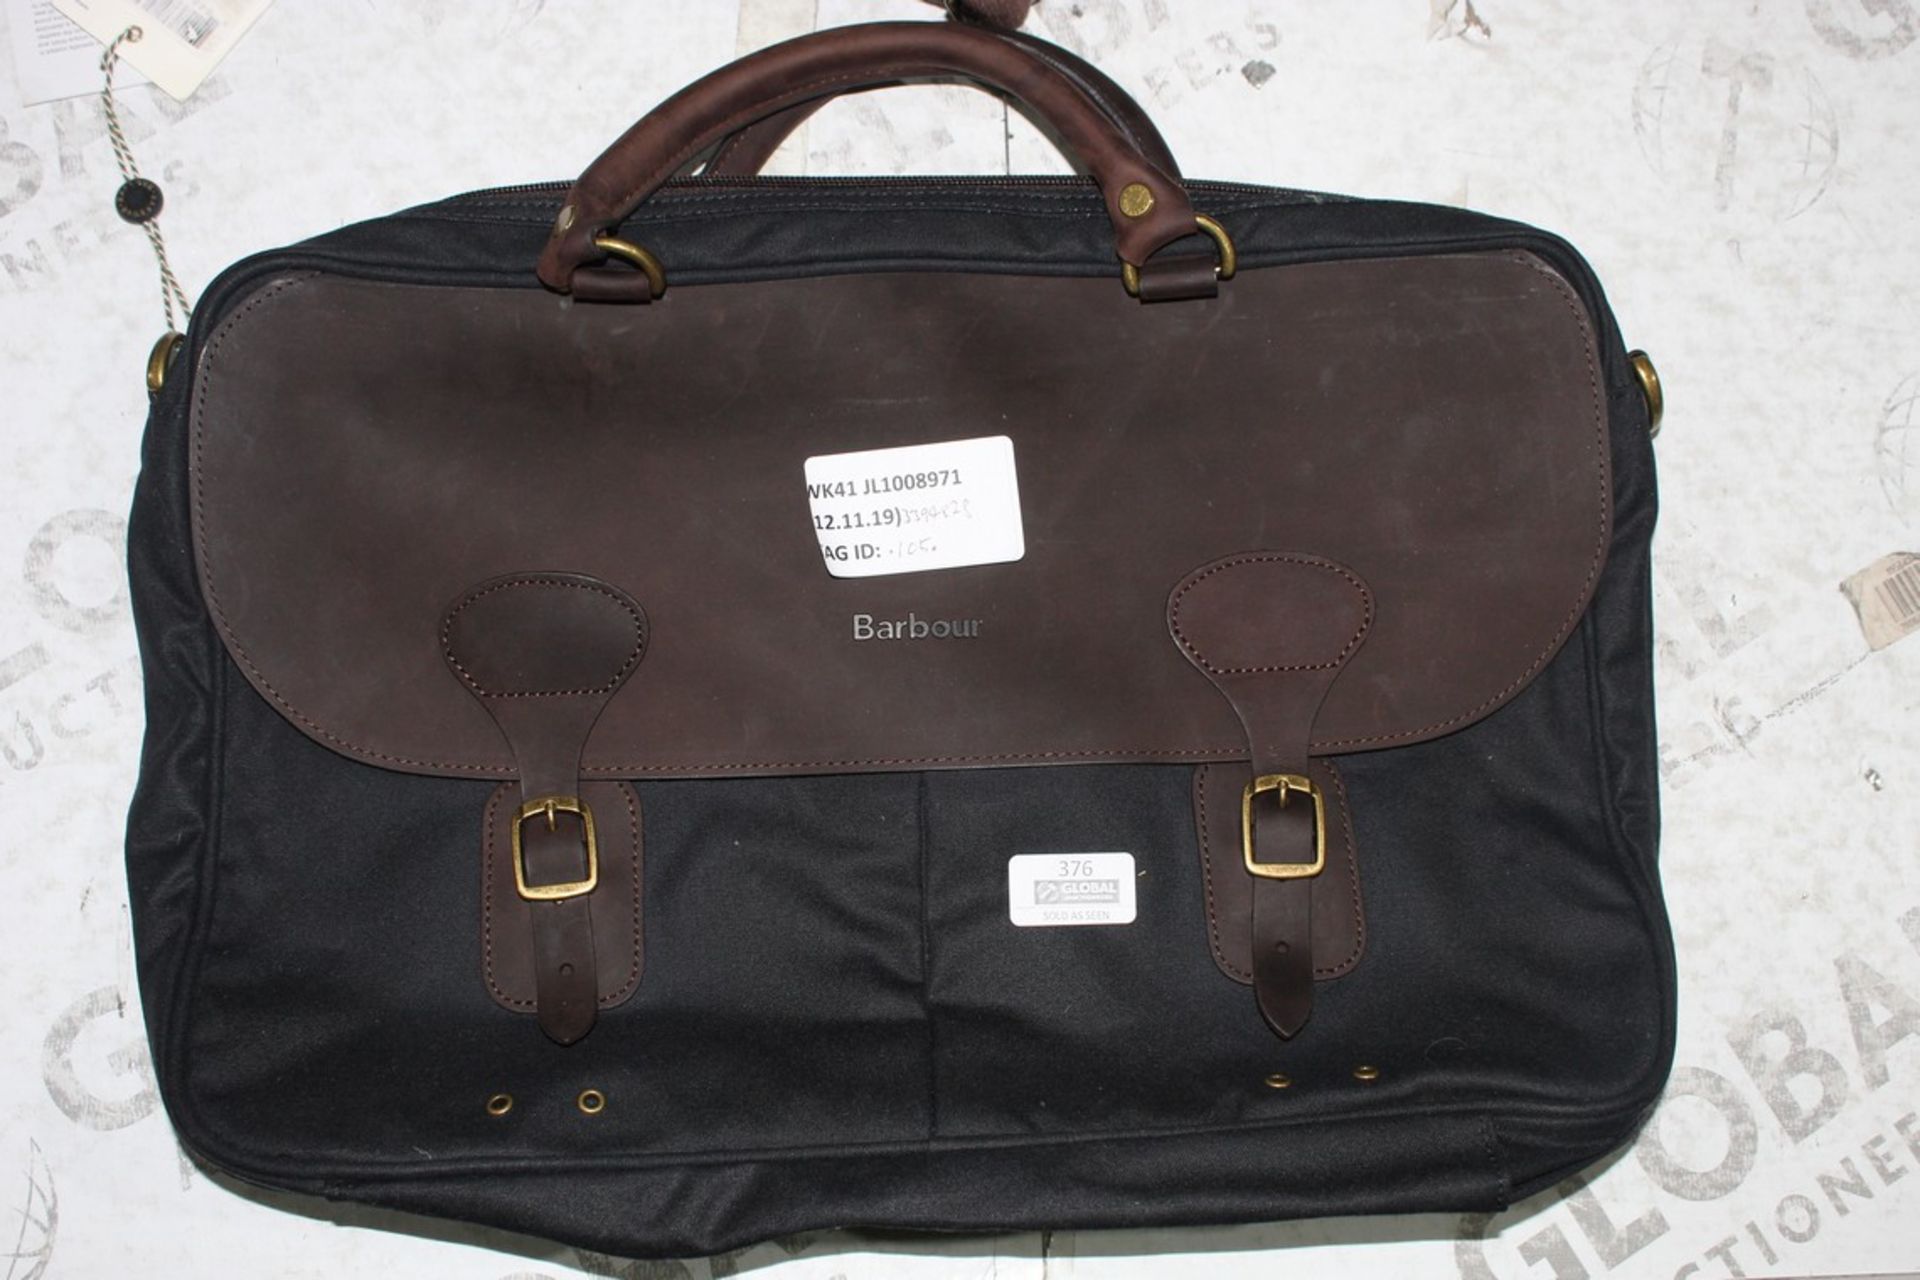 Barber International Wax Leather Laptop Bag RRP £105 (Pallet No 3394828) (Public Viewing and